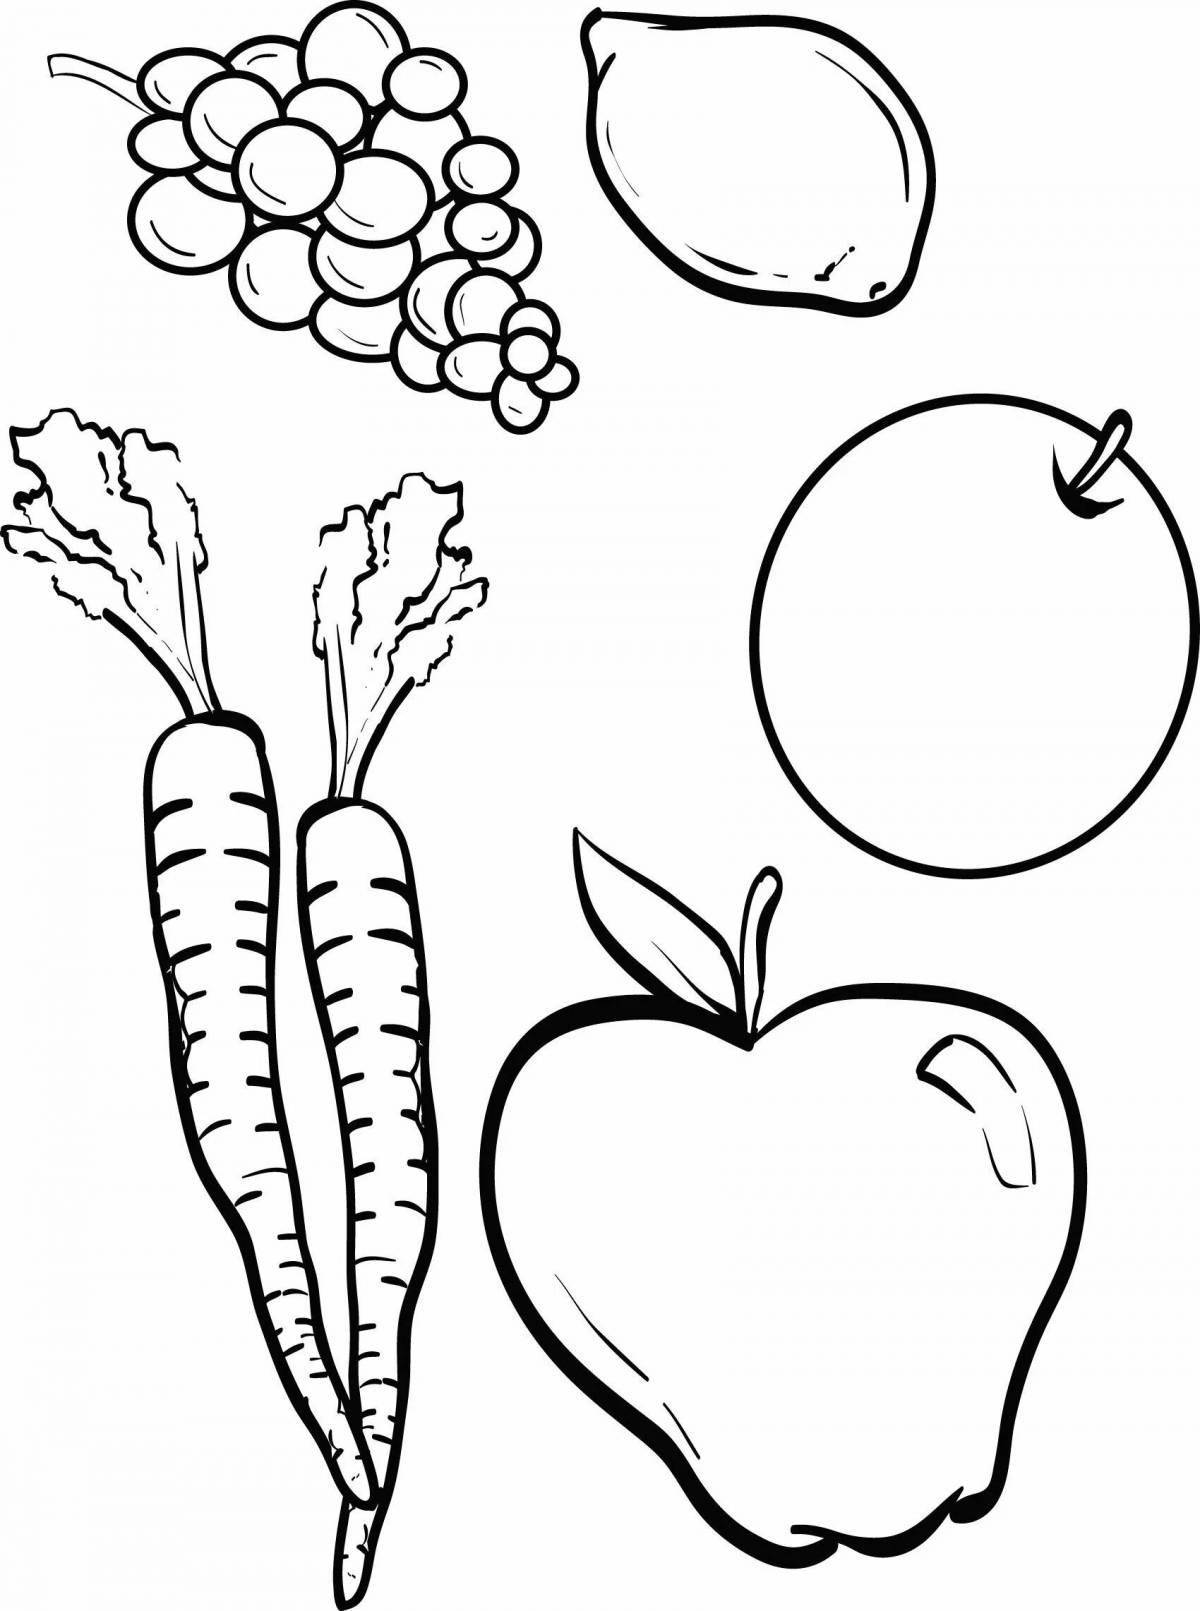 Adorable coloring book for kids 2-3 years old vegetables